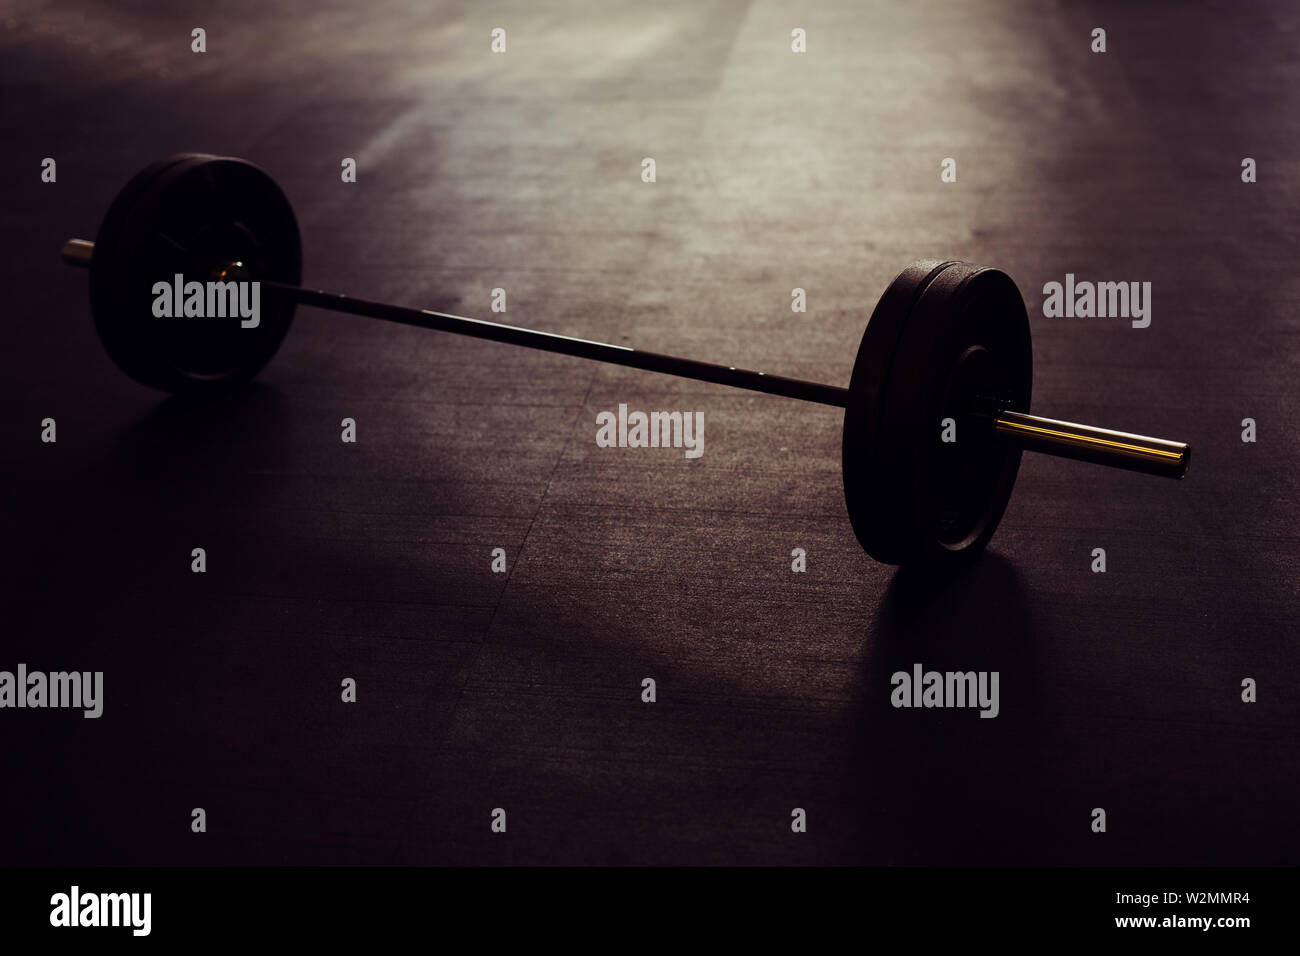 Concept shot of barbell lying on floor in industrial setting Stock Photo